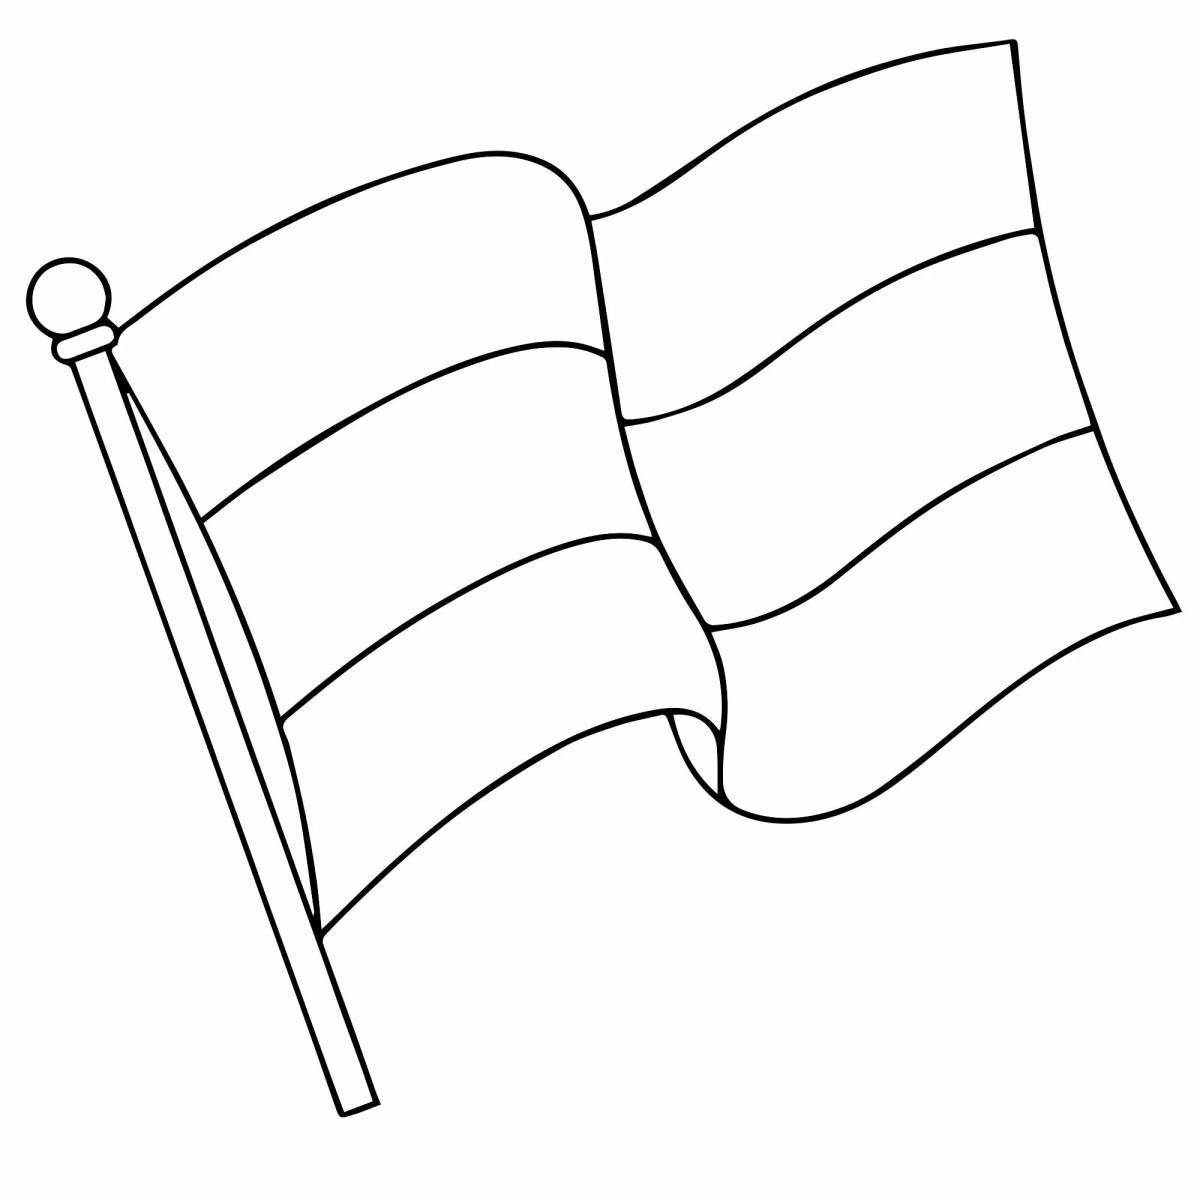 Coloring page animated tricolor flag